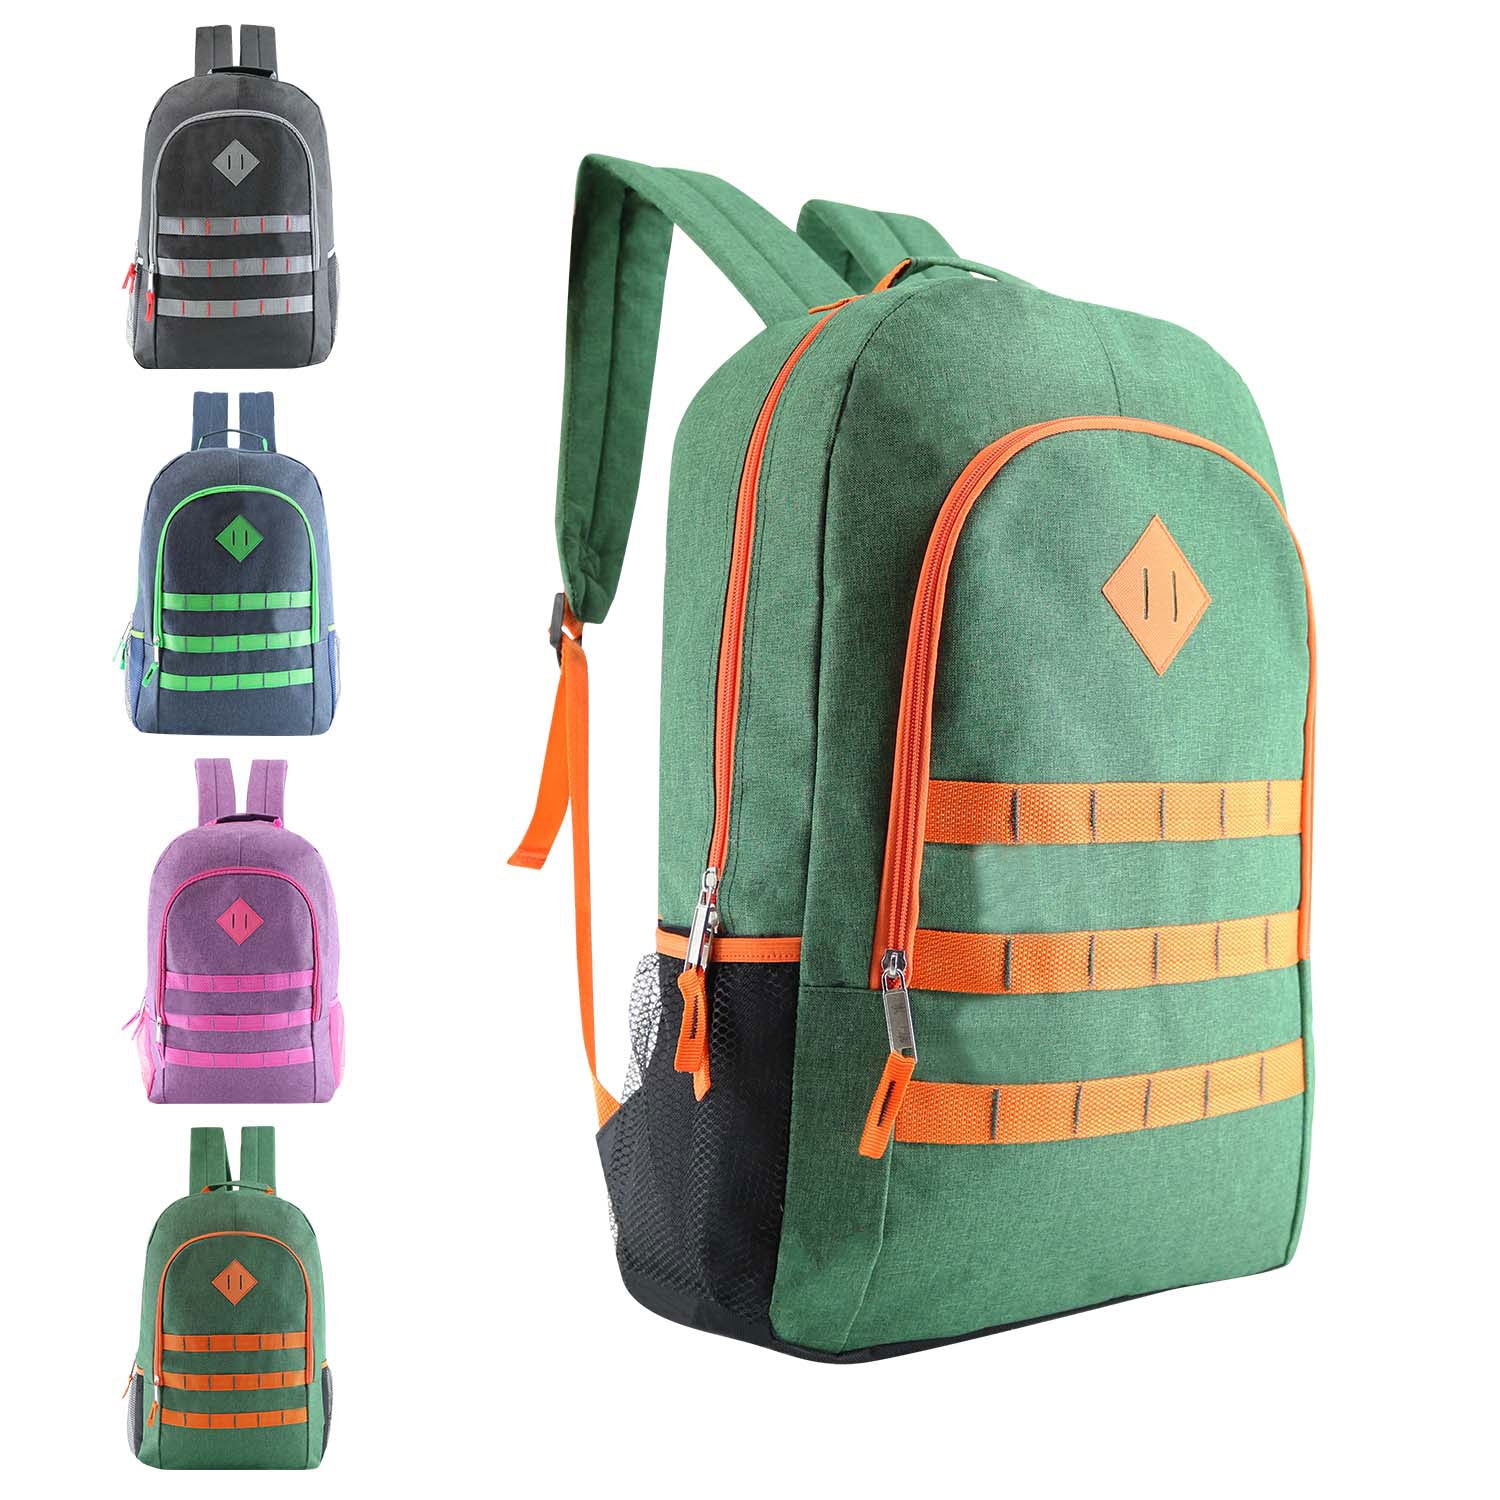 12 Deluxe Wholesale 19" Backpacks in Assorted Colors and 12 Bulk School Supply Kits of Your Choice